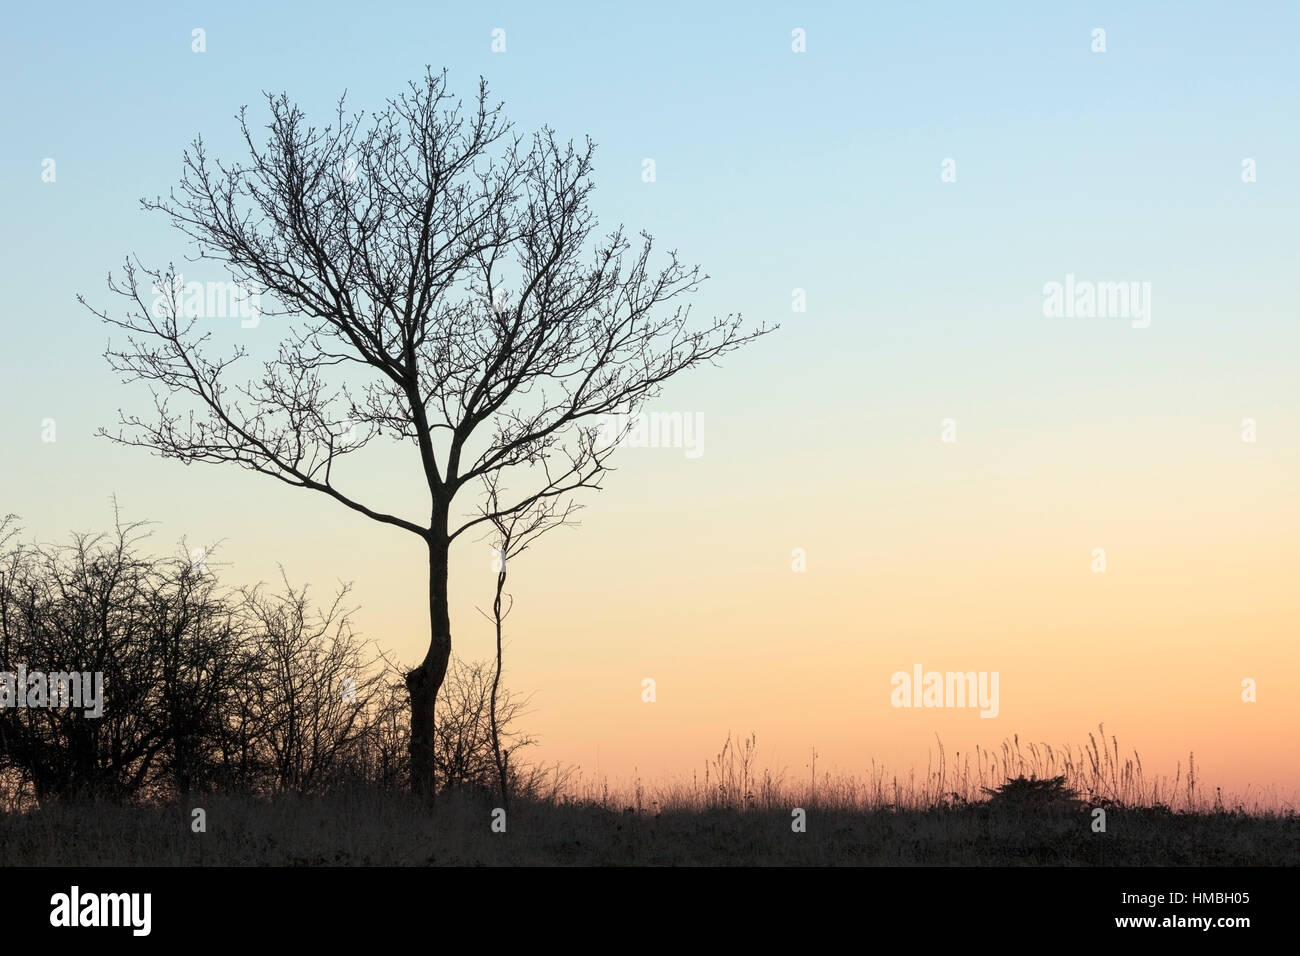 Solitary tree with branches silhouetted against a winter sunset Stock Photo